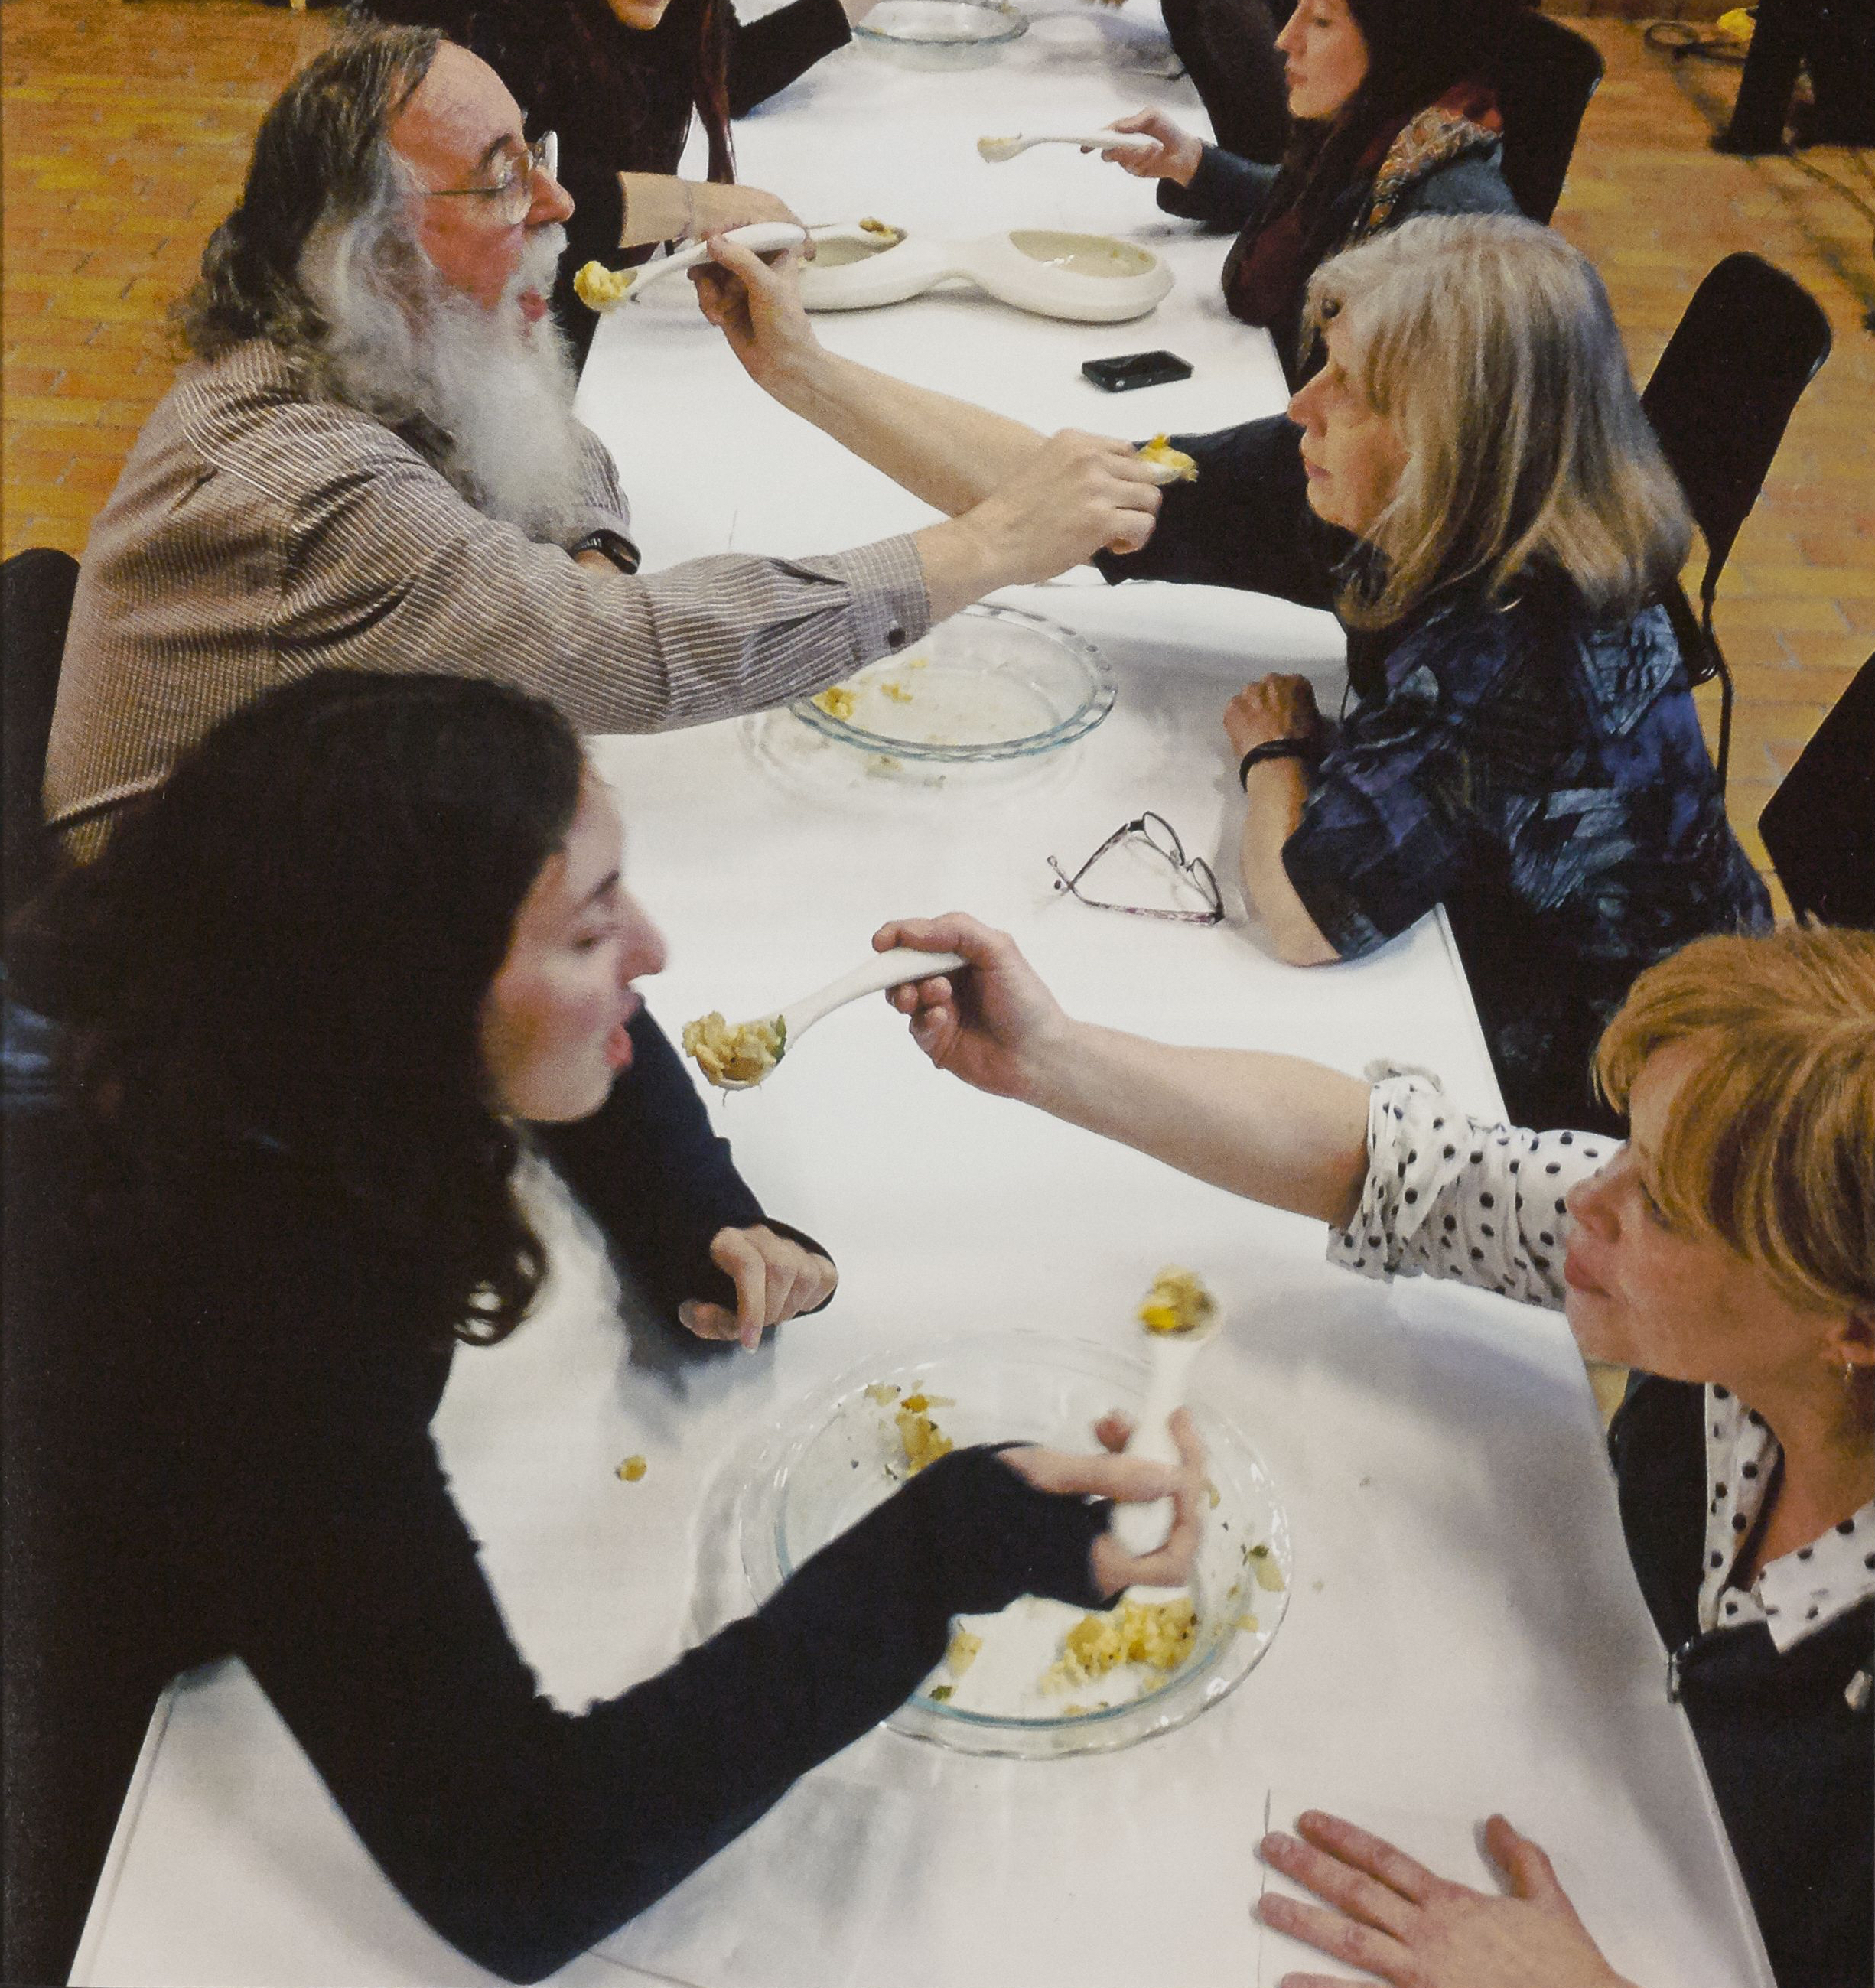 Feeding event at Alberta College of Art and Design, 2014.